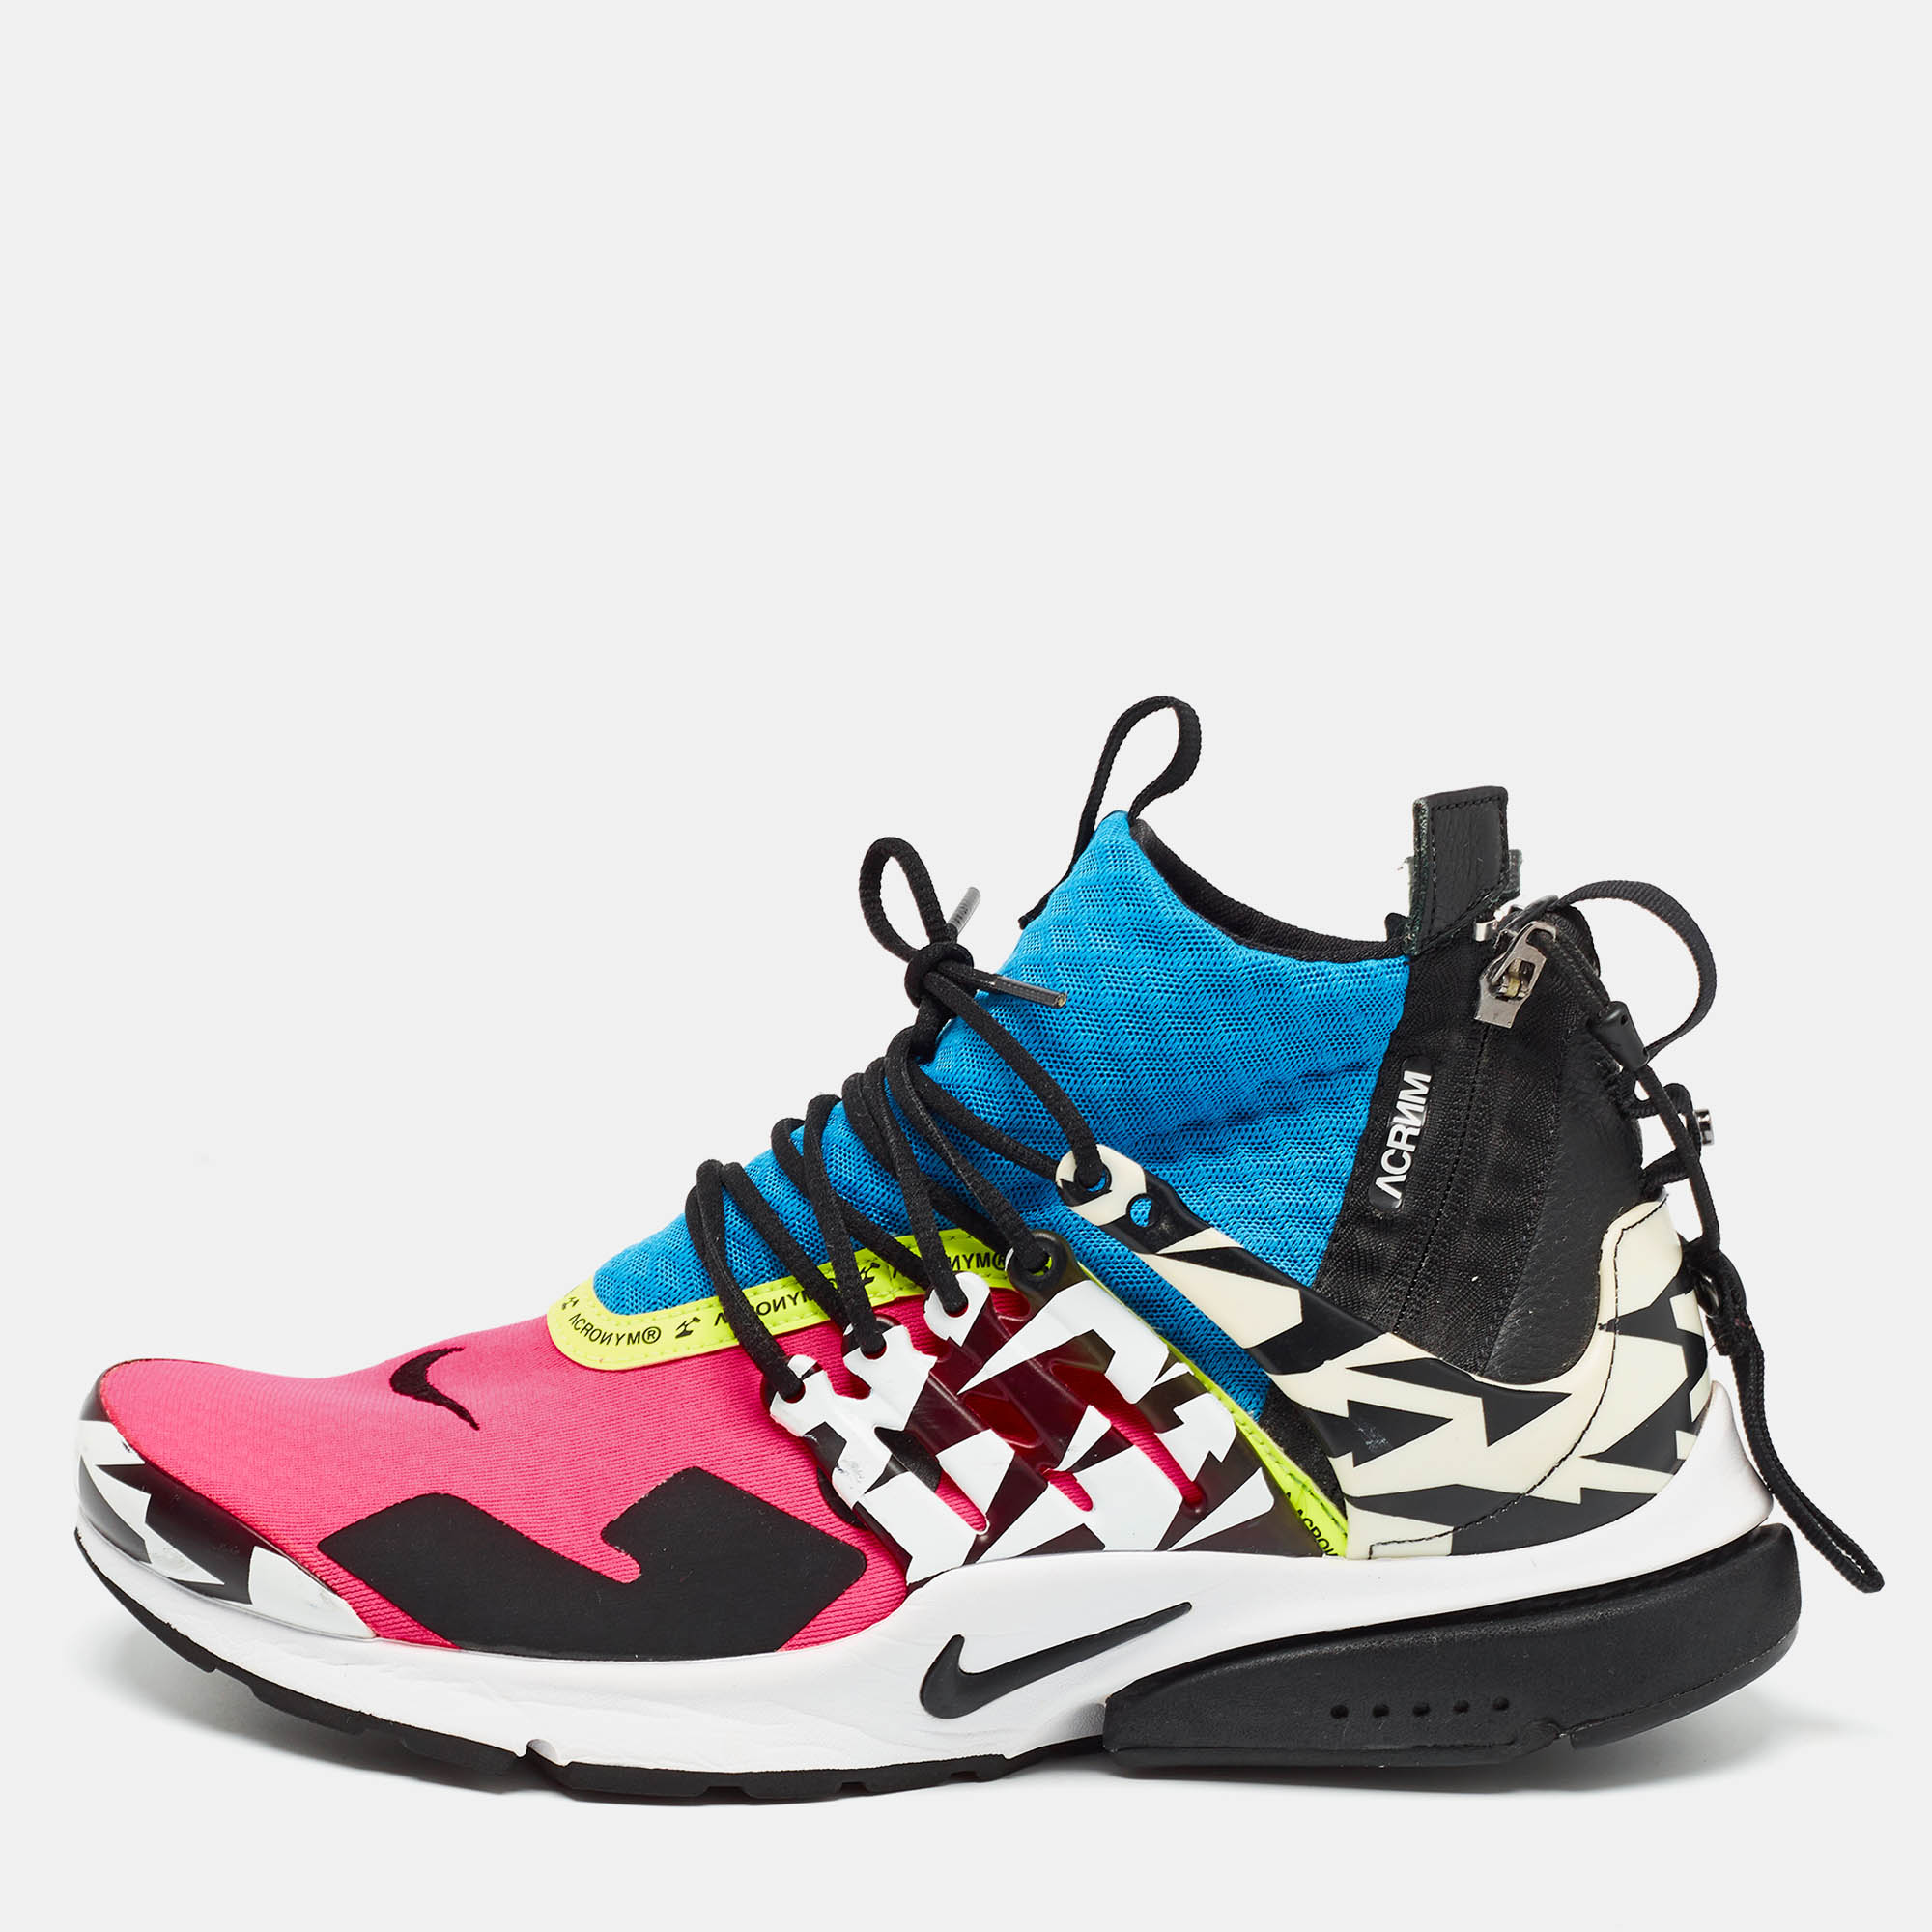 

Nike Acronym x Air Presto Multicolor Fabric and Leather Mid Racer Sneakers Size